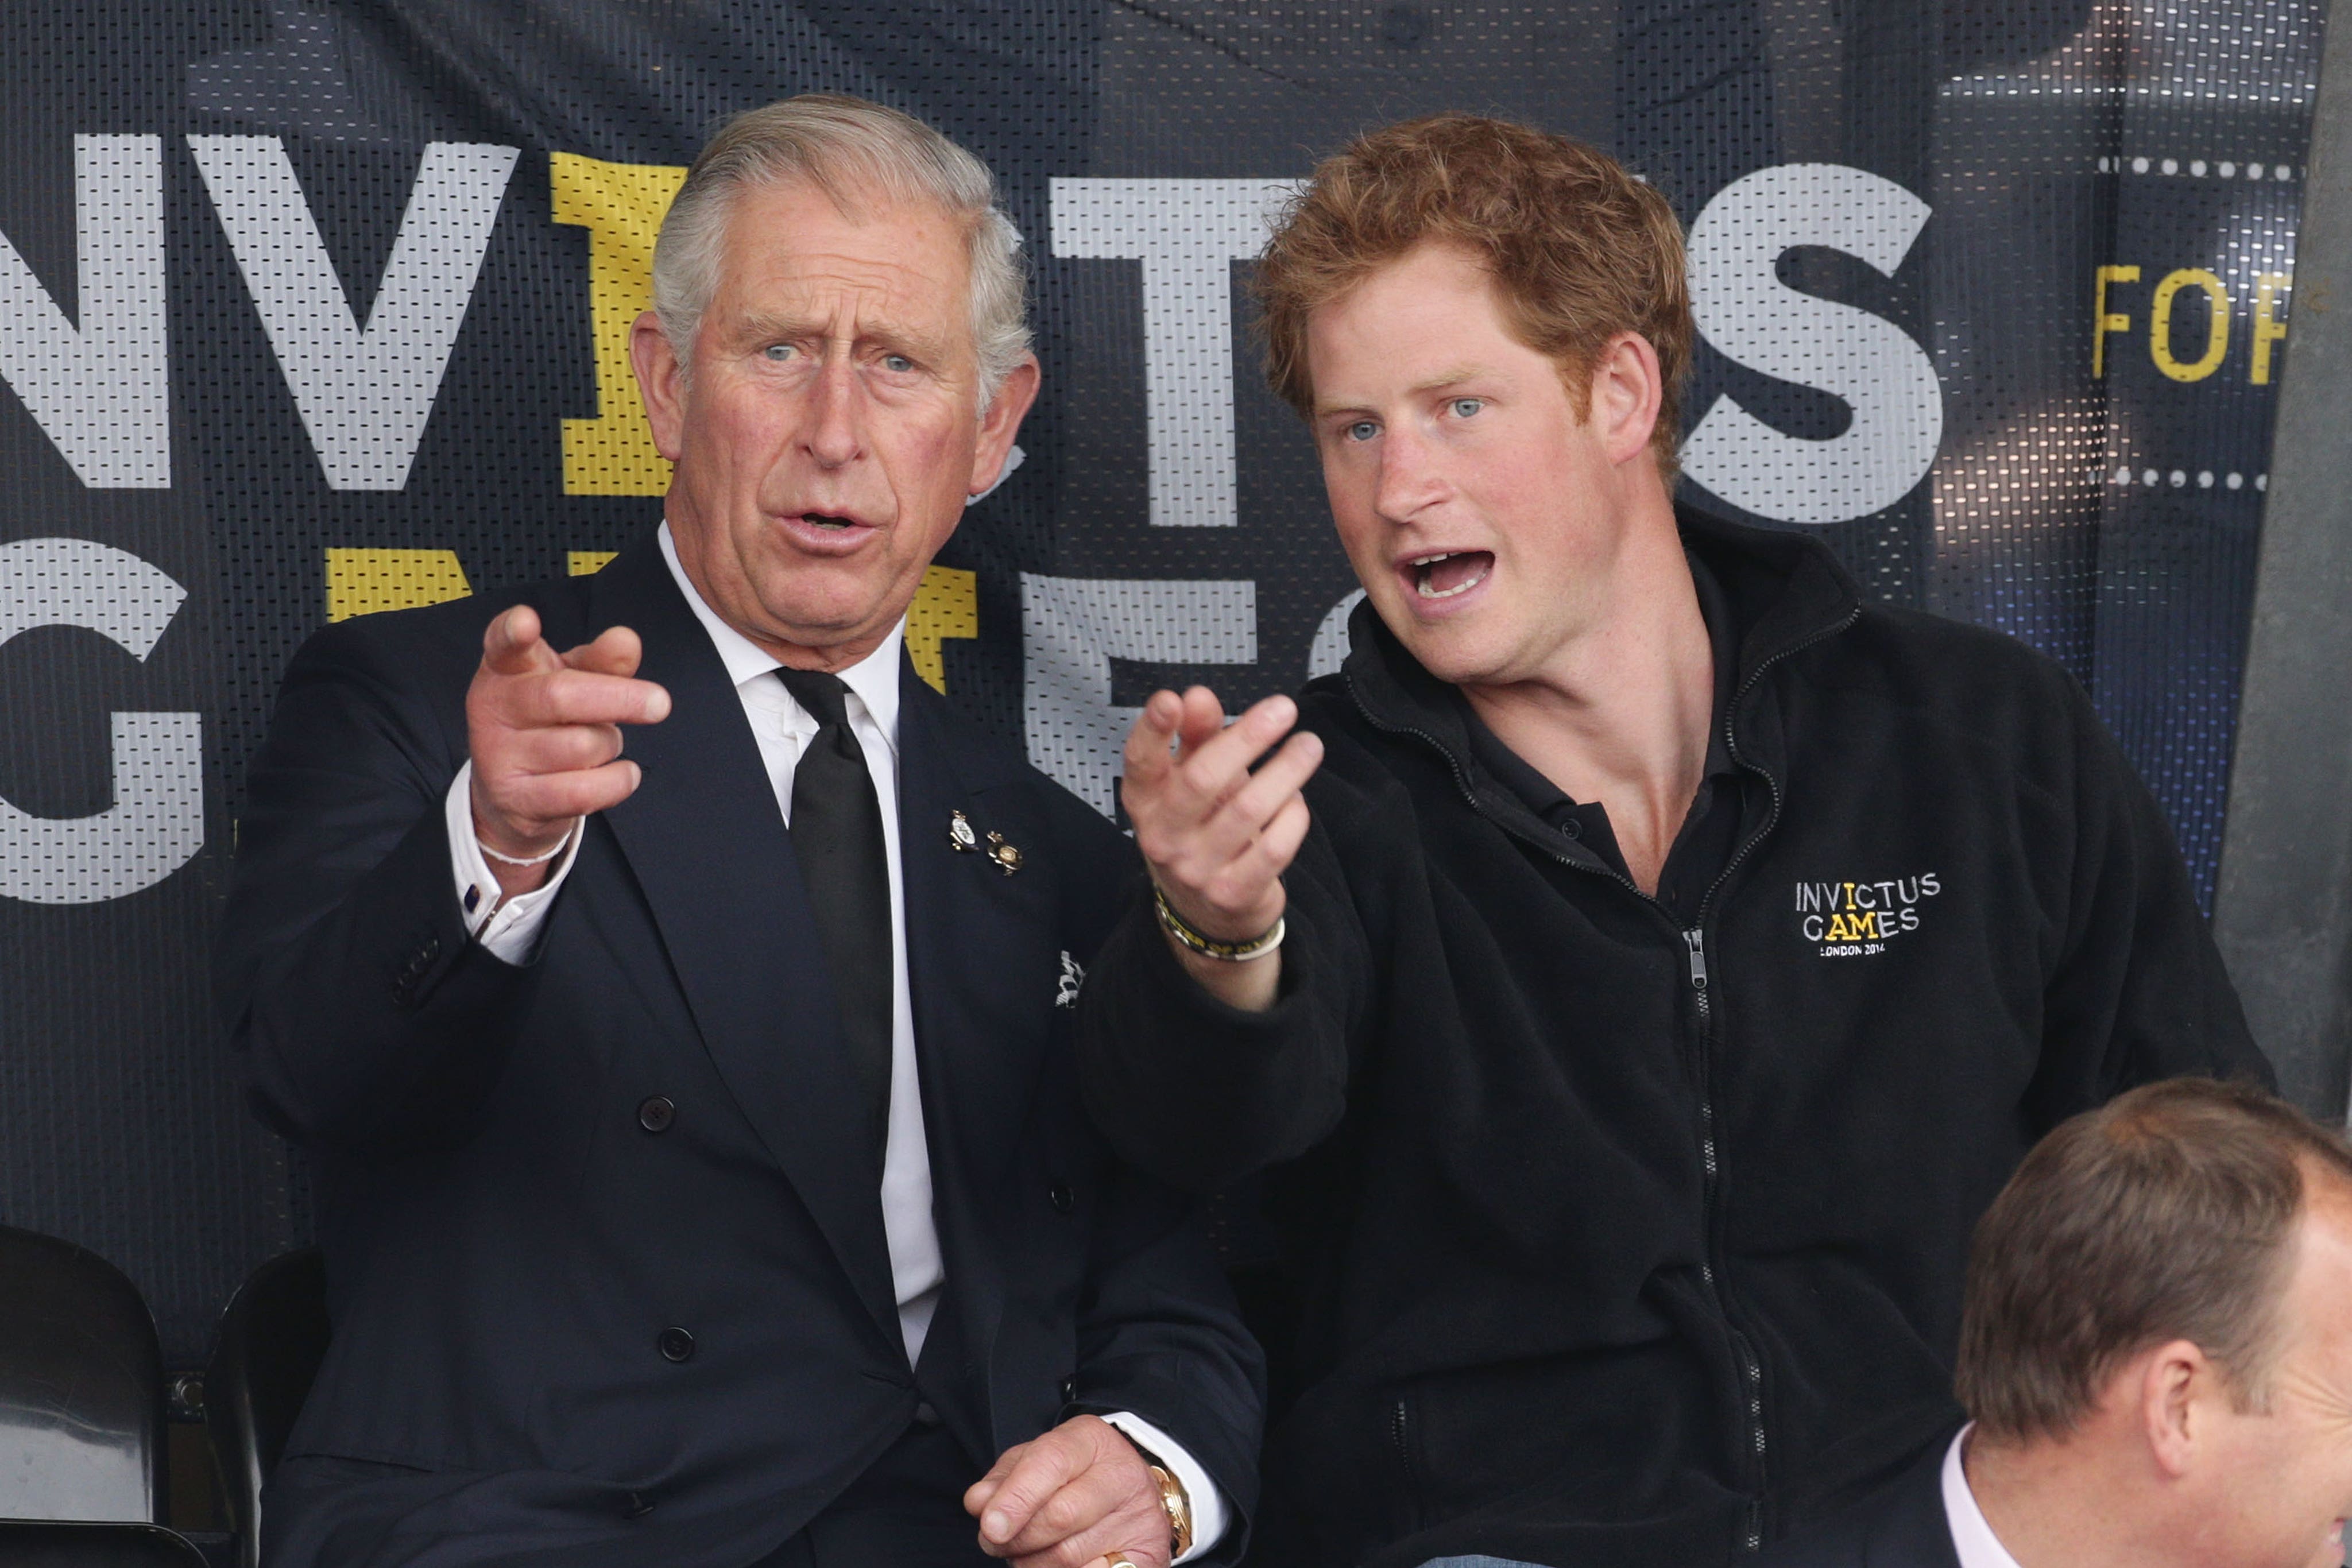 

<p>Charles and Harry together at the Invictus Games in 2014 (Yui Mok/PA)</p>
<p>” height=”2731″ width=”4096″ layout=”responsive” i-amphtml-layout=”responsive”><i-amphtml-sizer slot=